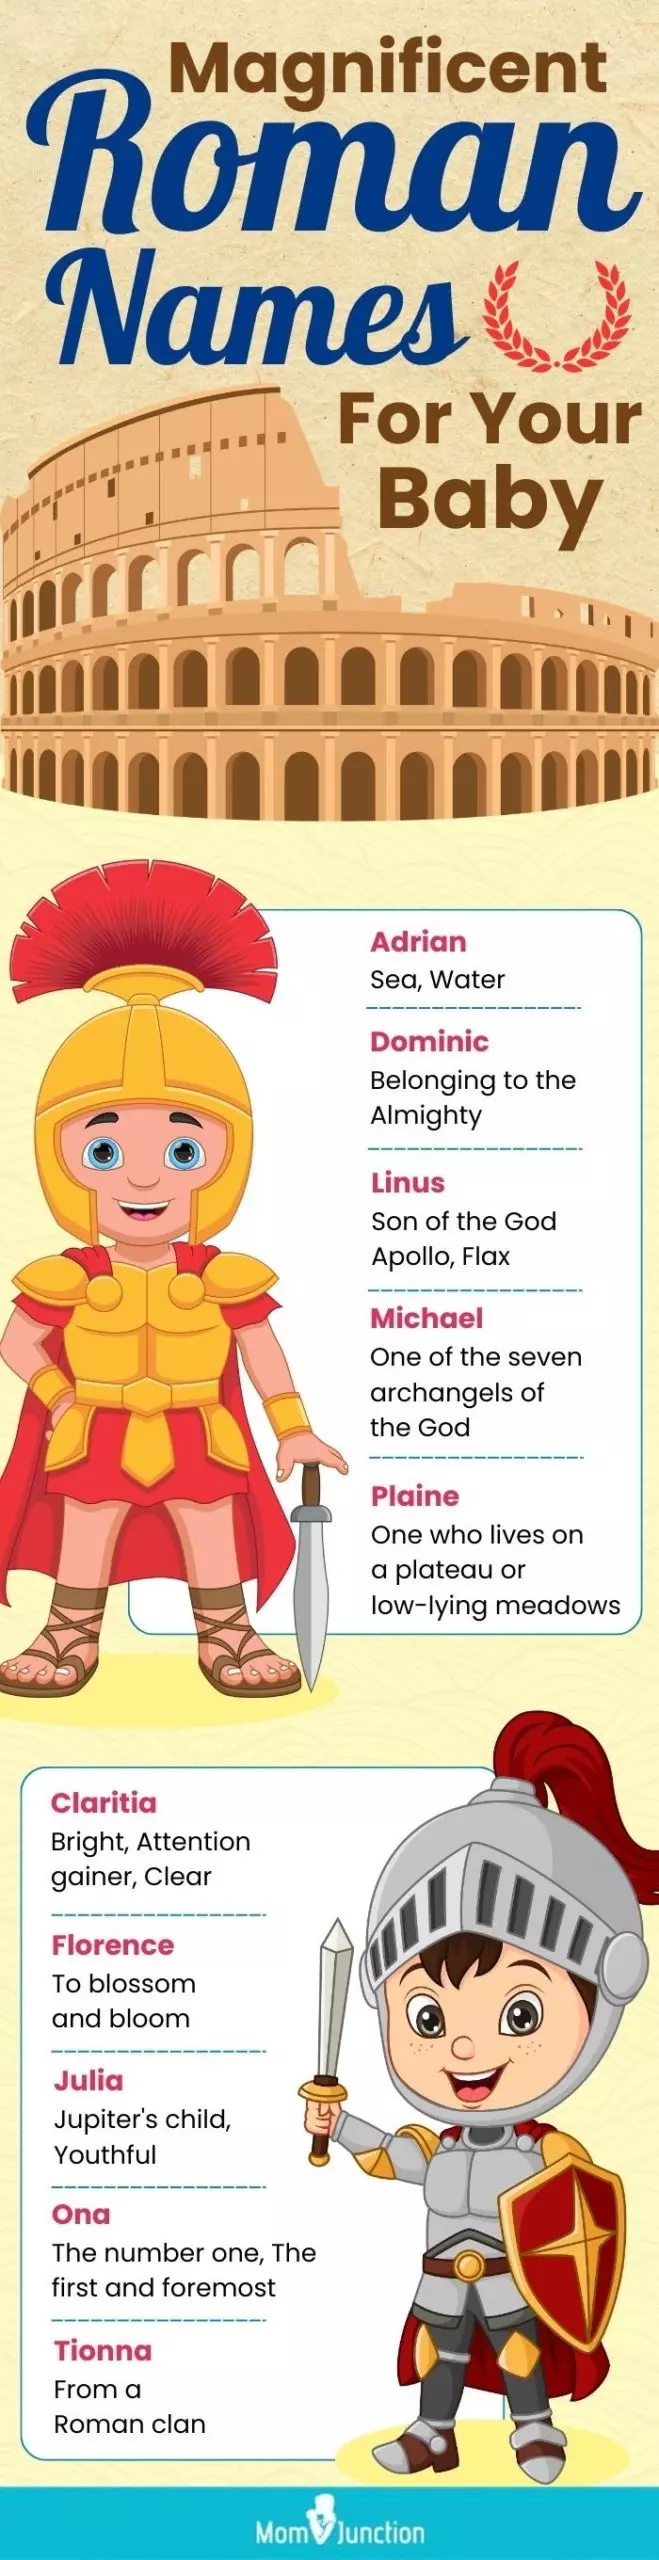  magnificent roman names for your baby (infographic)